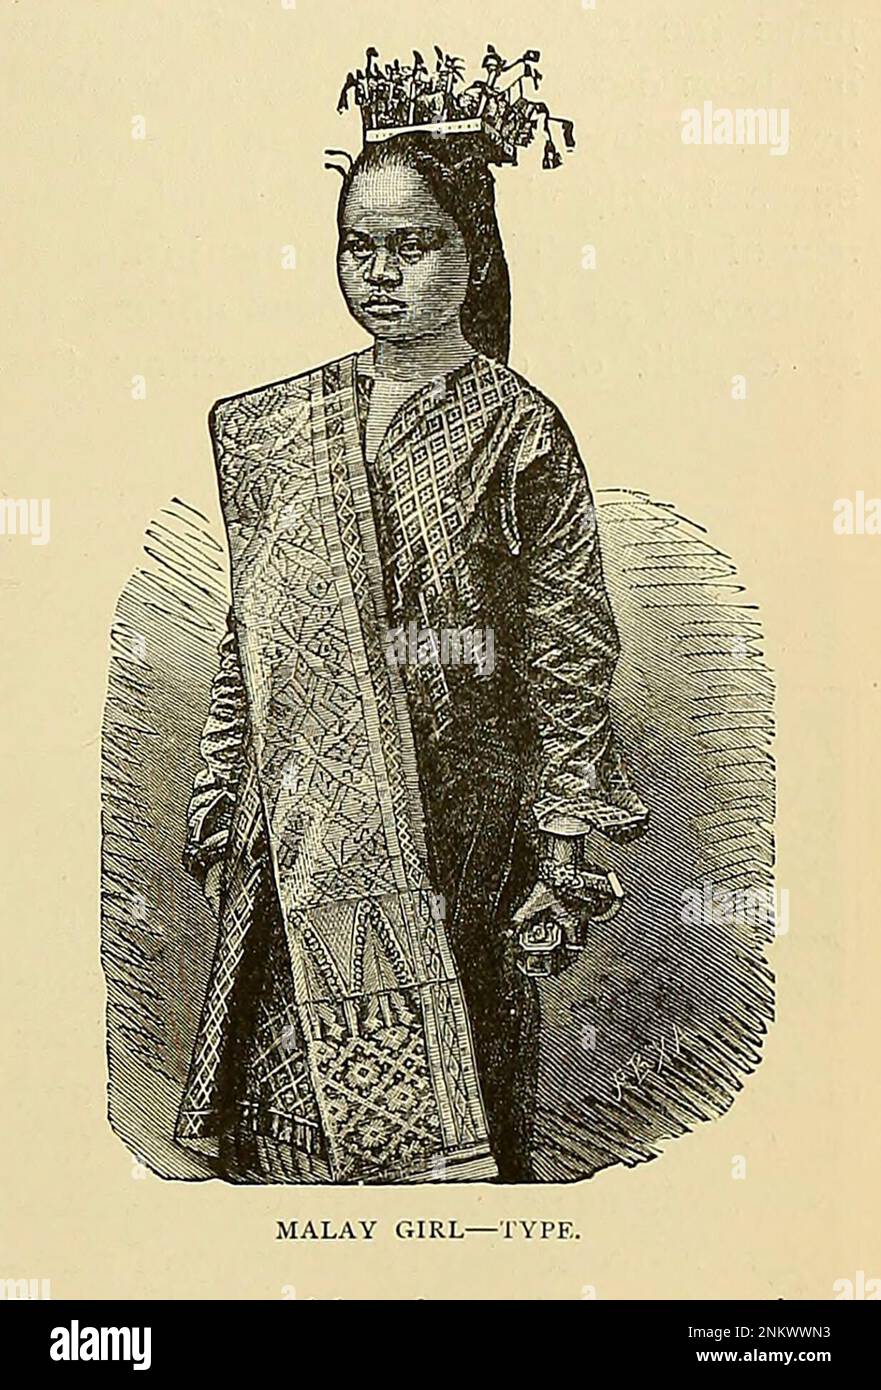 Malay Girl Chapter XXI - The Malays from Cyclopedia universal history : embracing the most complete and recent presentation of the subject in two principal parts or divisions of more than six thousand pages by John Clark Ridpath, 1840-1900 Publication date 1895 Publisher Boston : Balch Bros. Volume 6 History of Man and Mankind Stock Photo